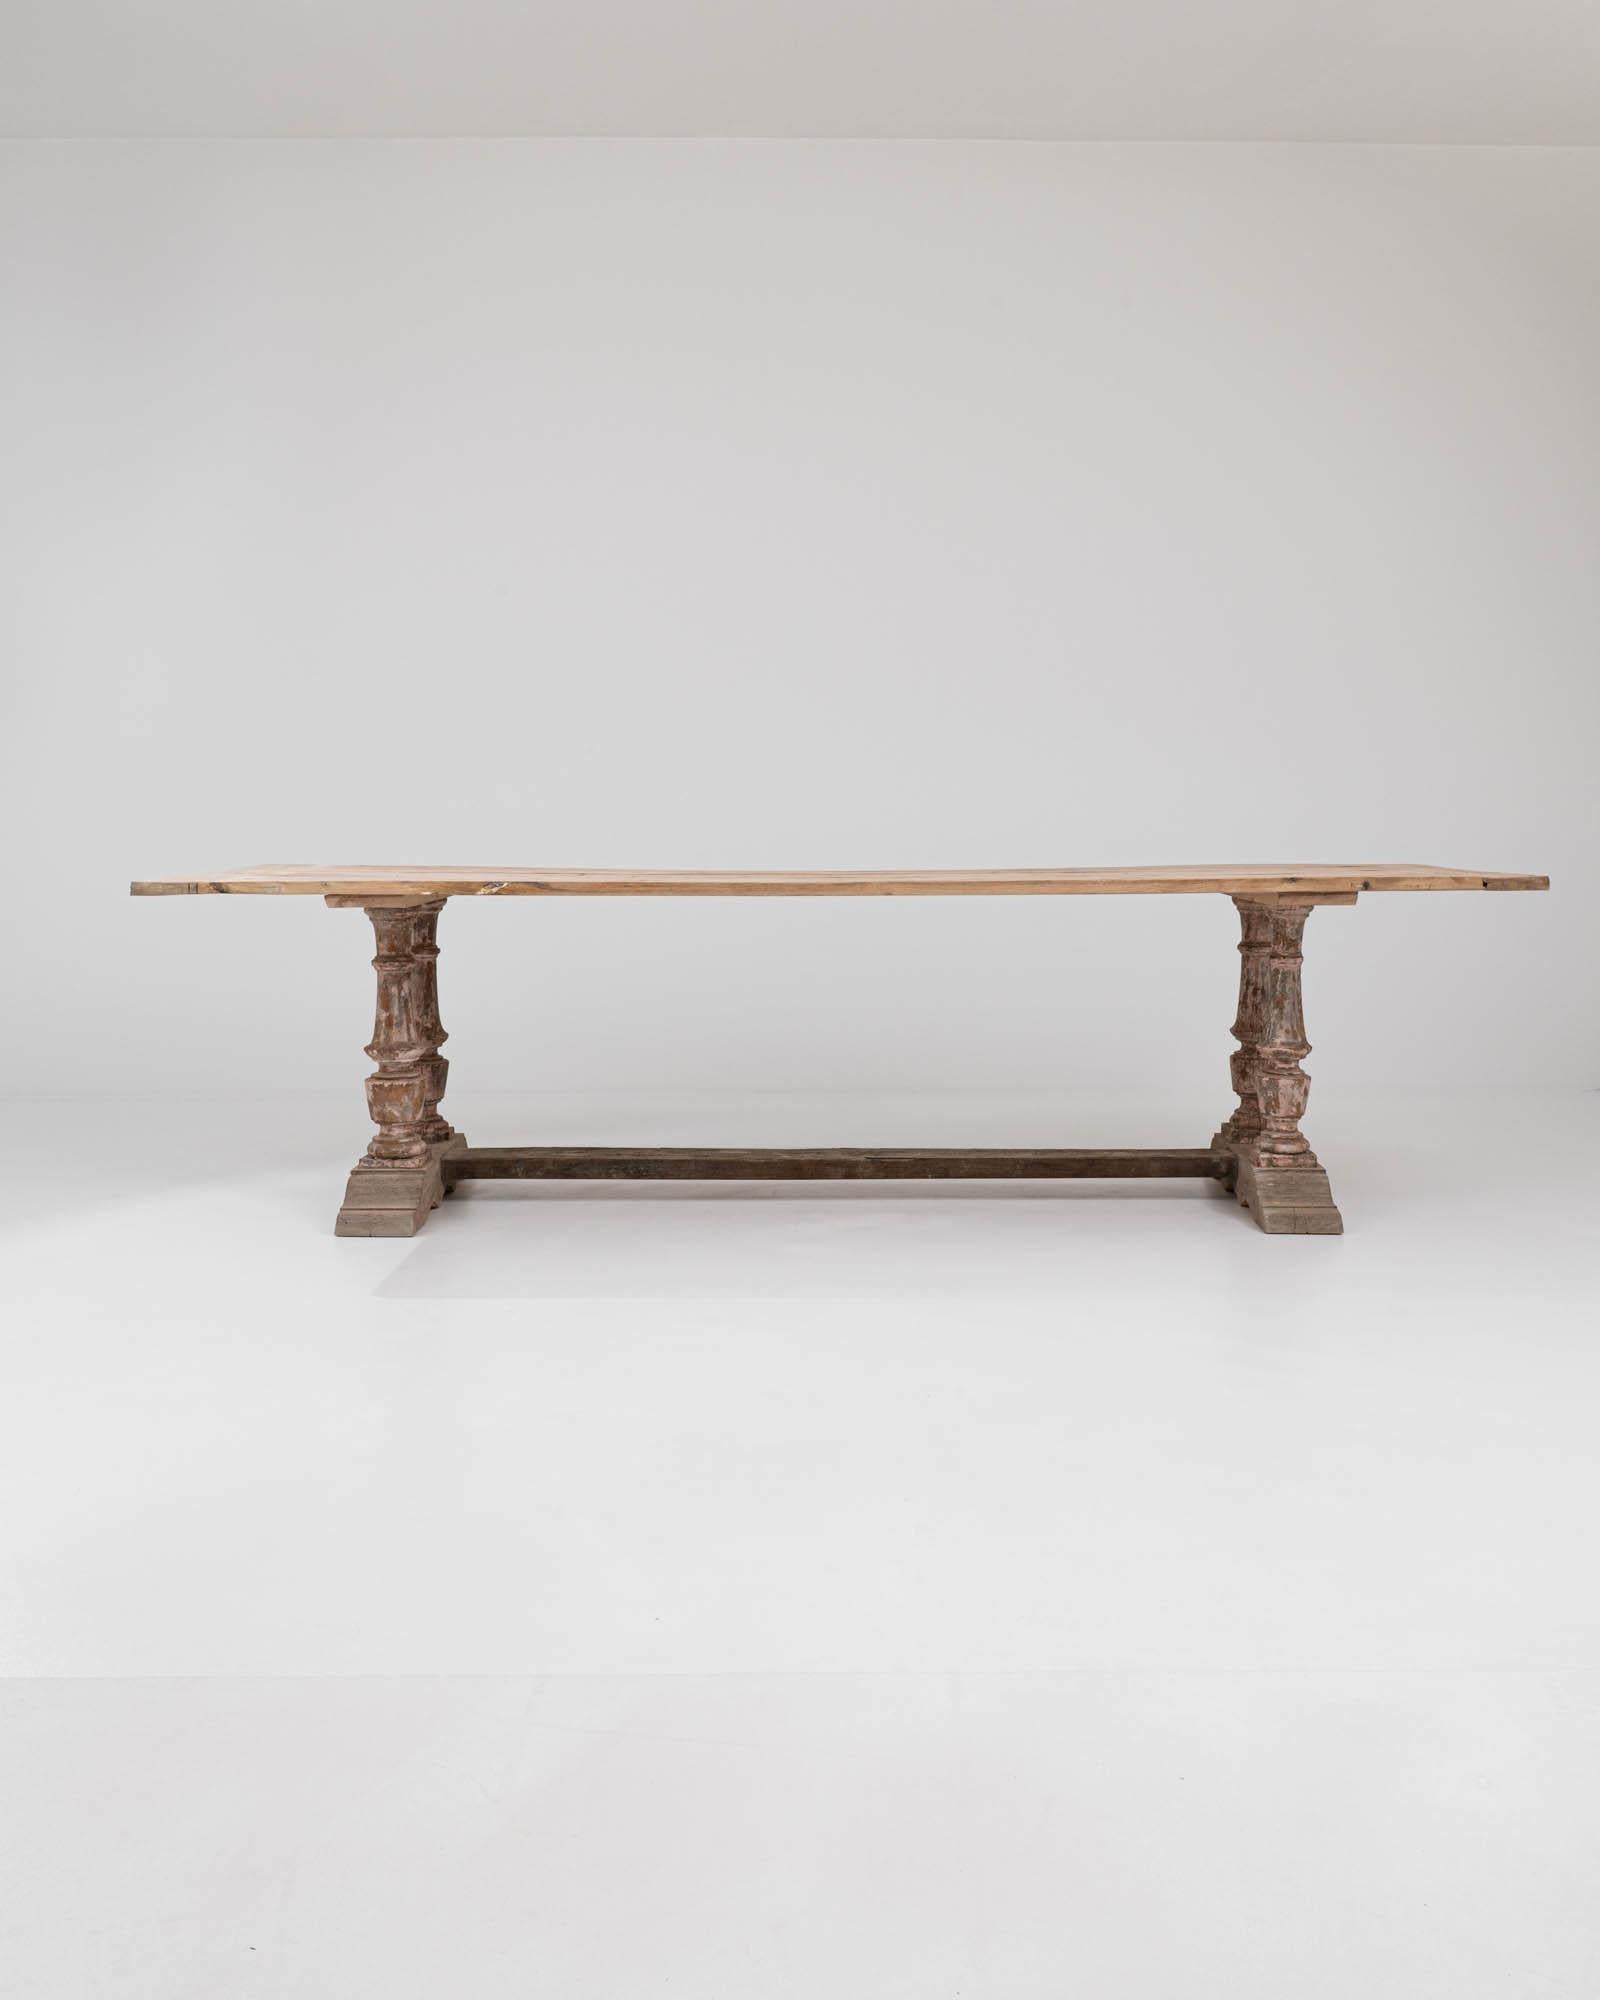 Made in Northern Africa, this dining table fuses eclectic elements in its unique design. The raw wood tabletop is perched atop a distressed base featuring four expertly carved baluster legs attached to sturdy bracket feet. The variations in wood